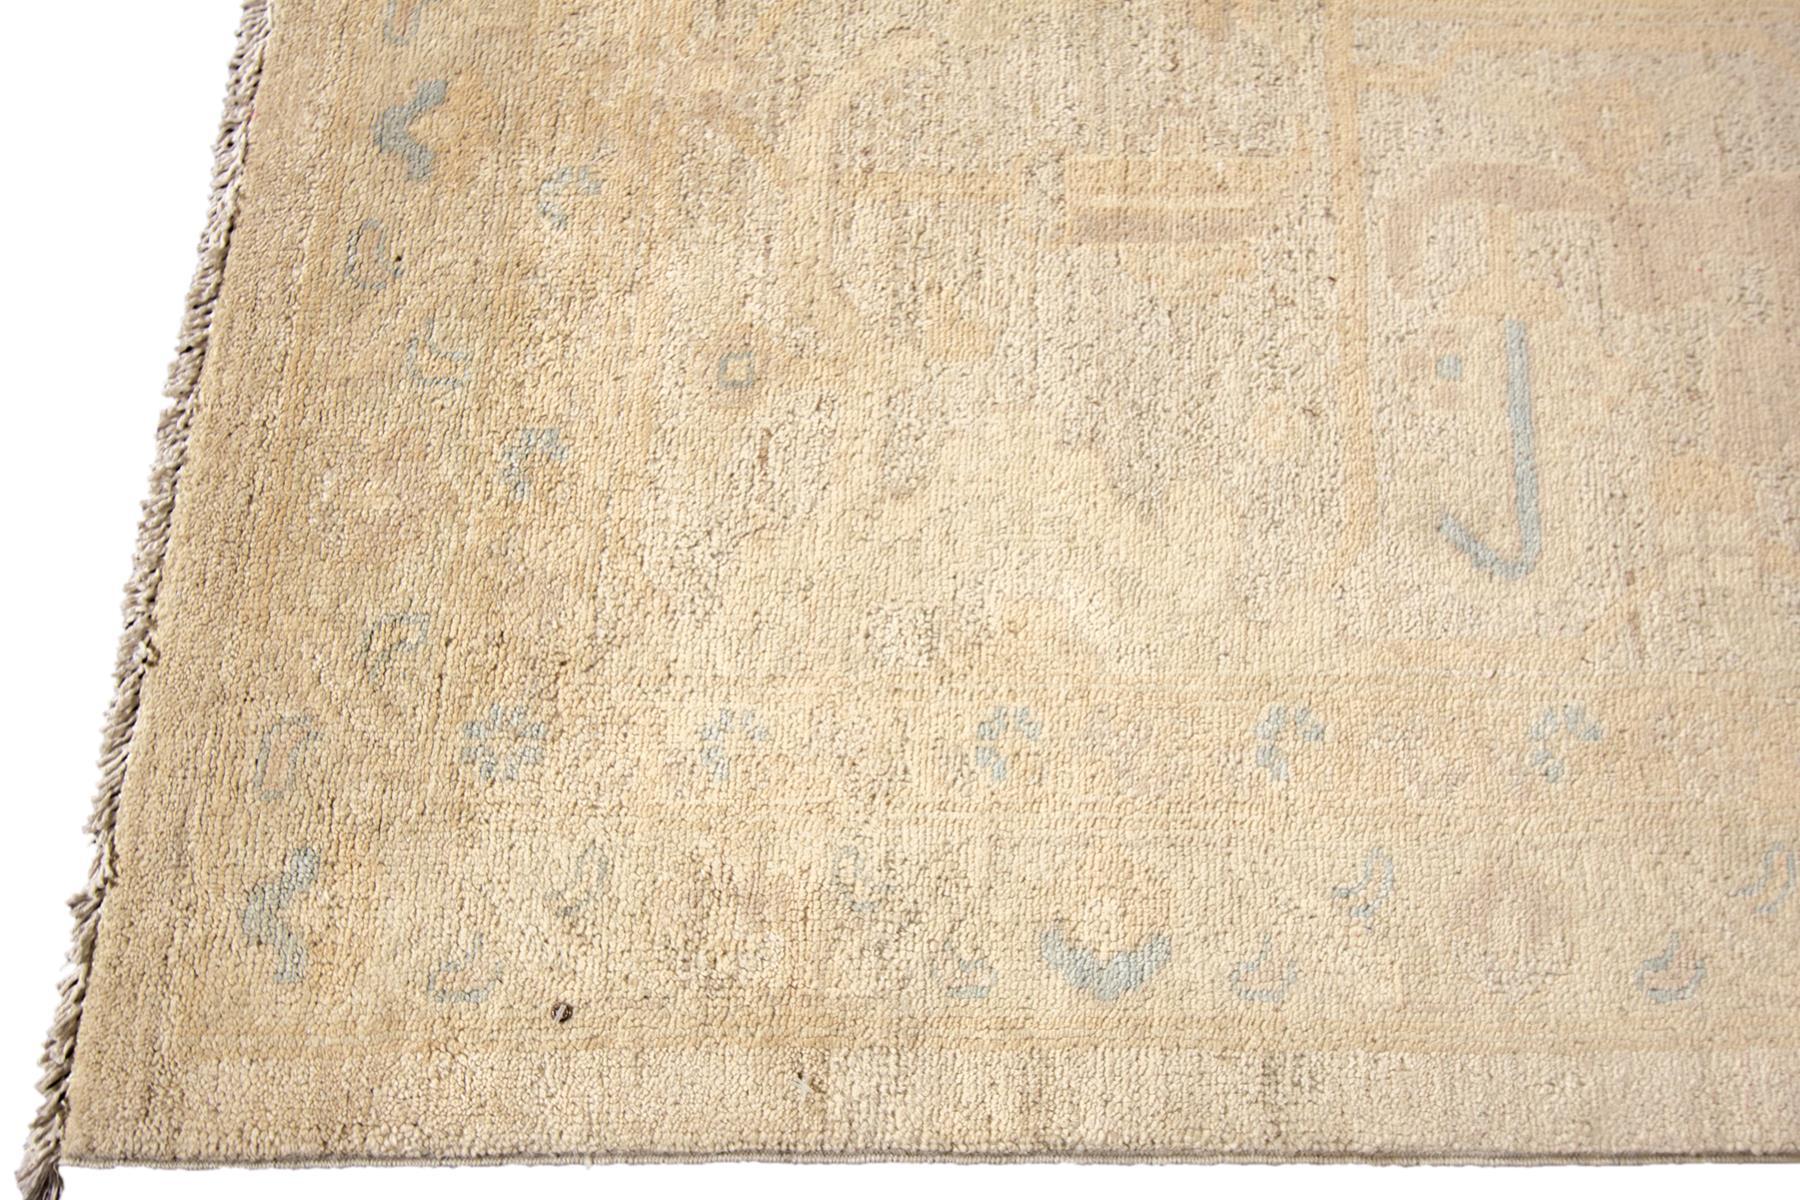 A 21st century contemporary Oushak rug with an ivory floral motif. It would be the perfect addition to your home. This rug measures 12'1